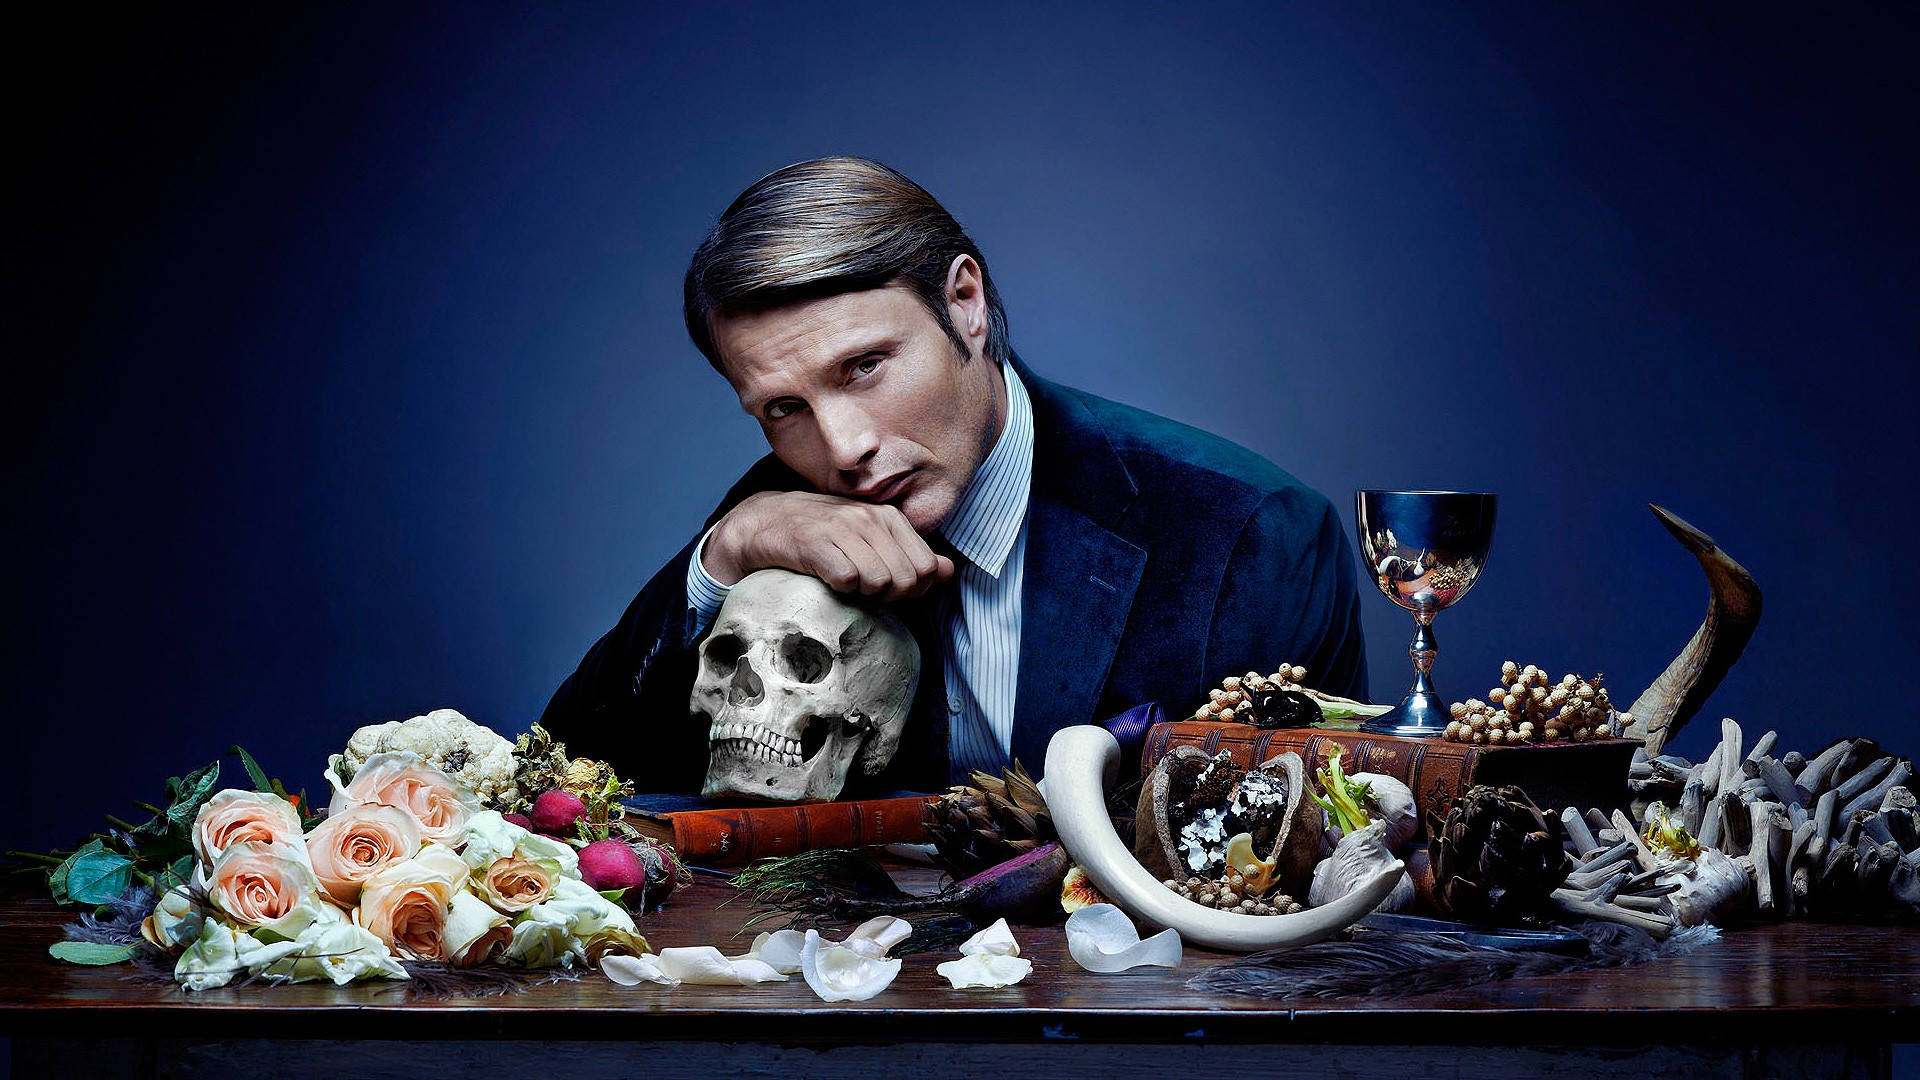 Hannibal Promotional Poster Background